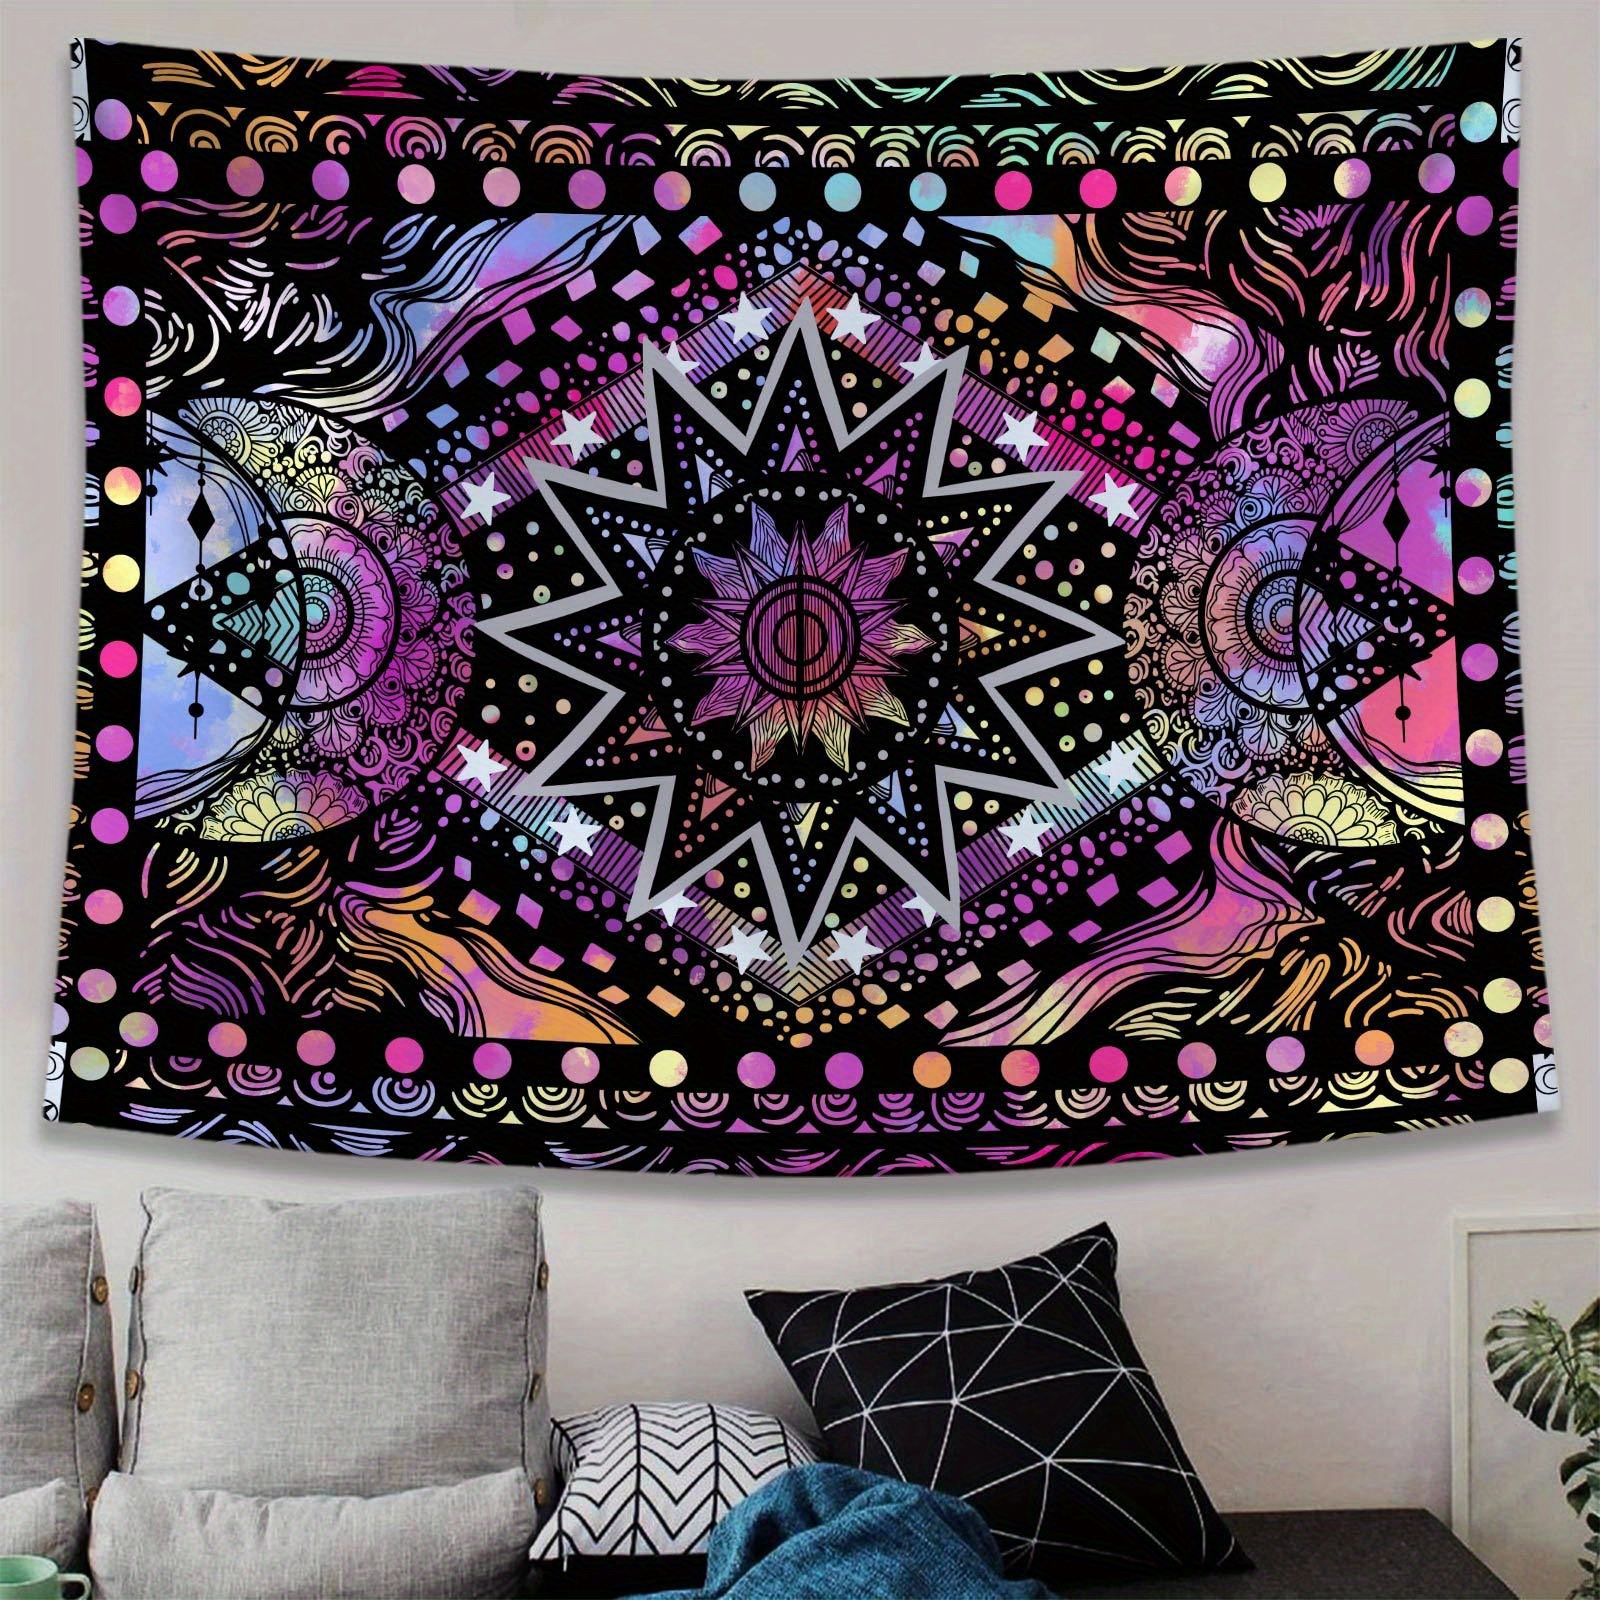 

1pc, Polyester, Psychedelic Colorful Sun And Moon Tapestry Wall Hanging, Indie Hippie Mandala Cool Trippy Wall Tapestries, Purple Blacklight Tapestry For Bedroom Living Room Dorm (multi Color)